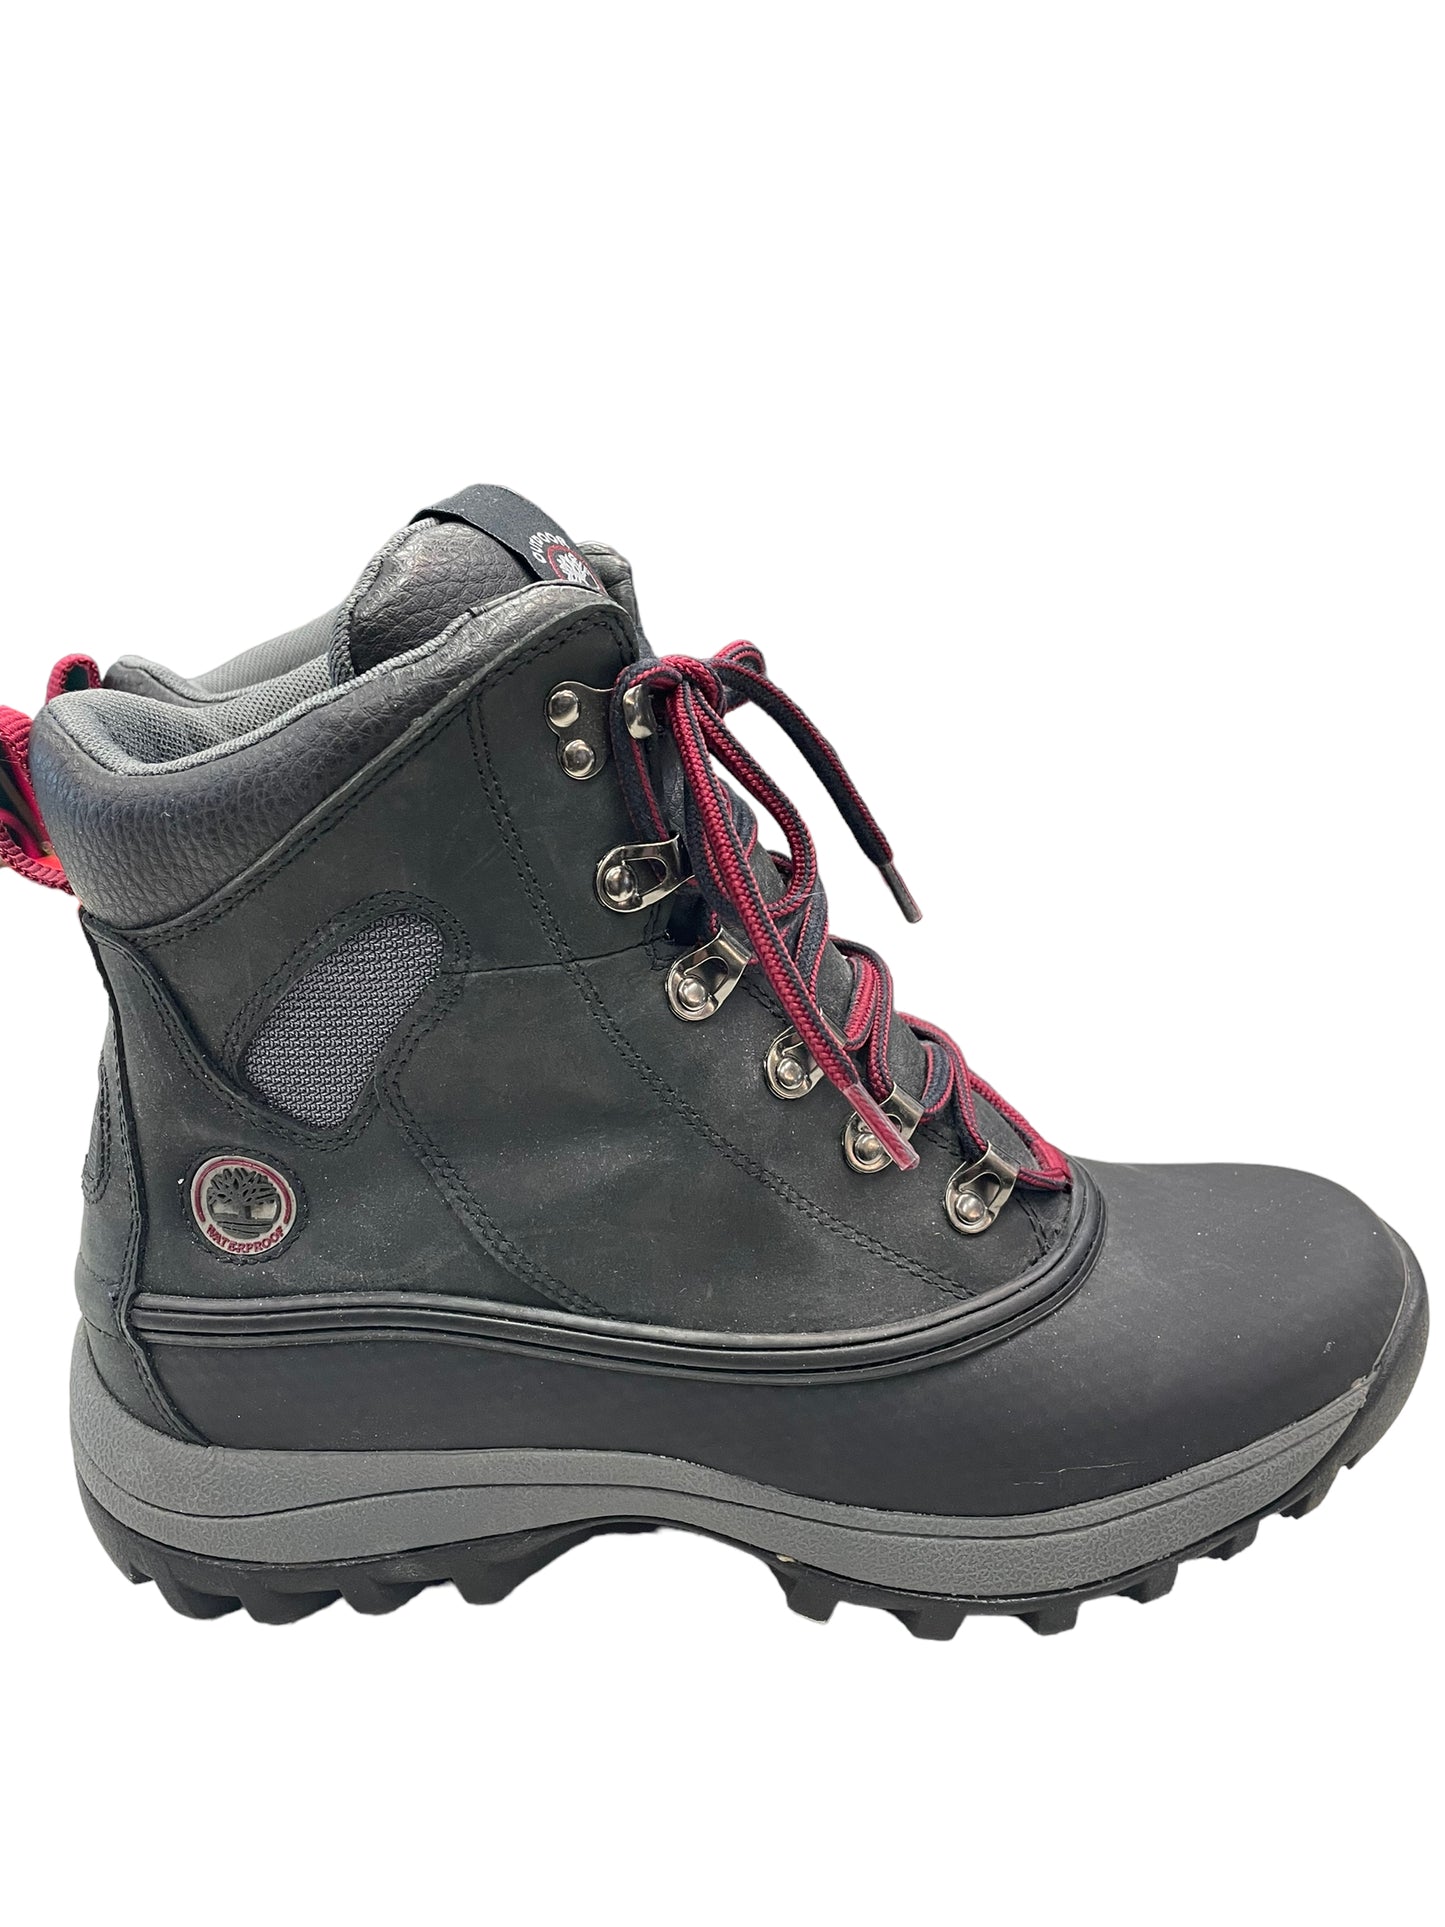 Boots Hiking By Timberland  Size: 9